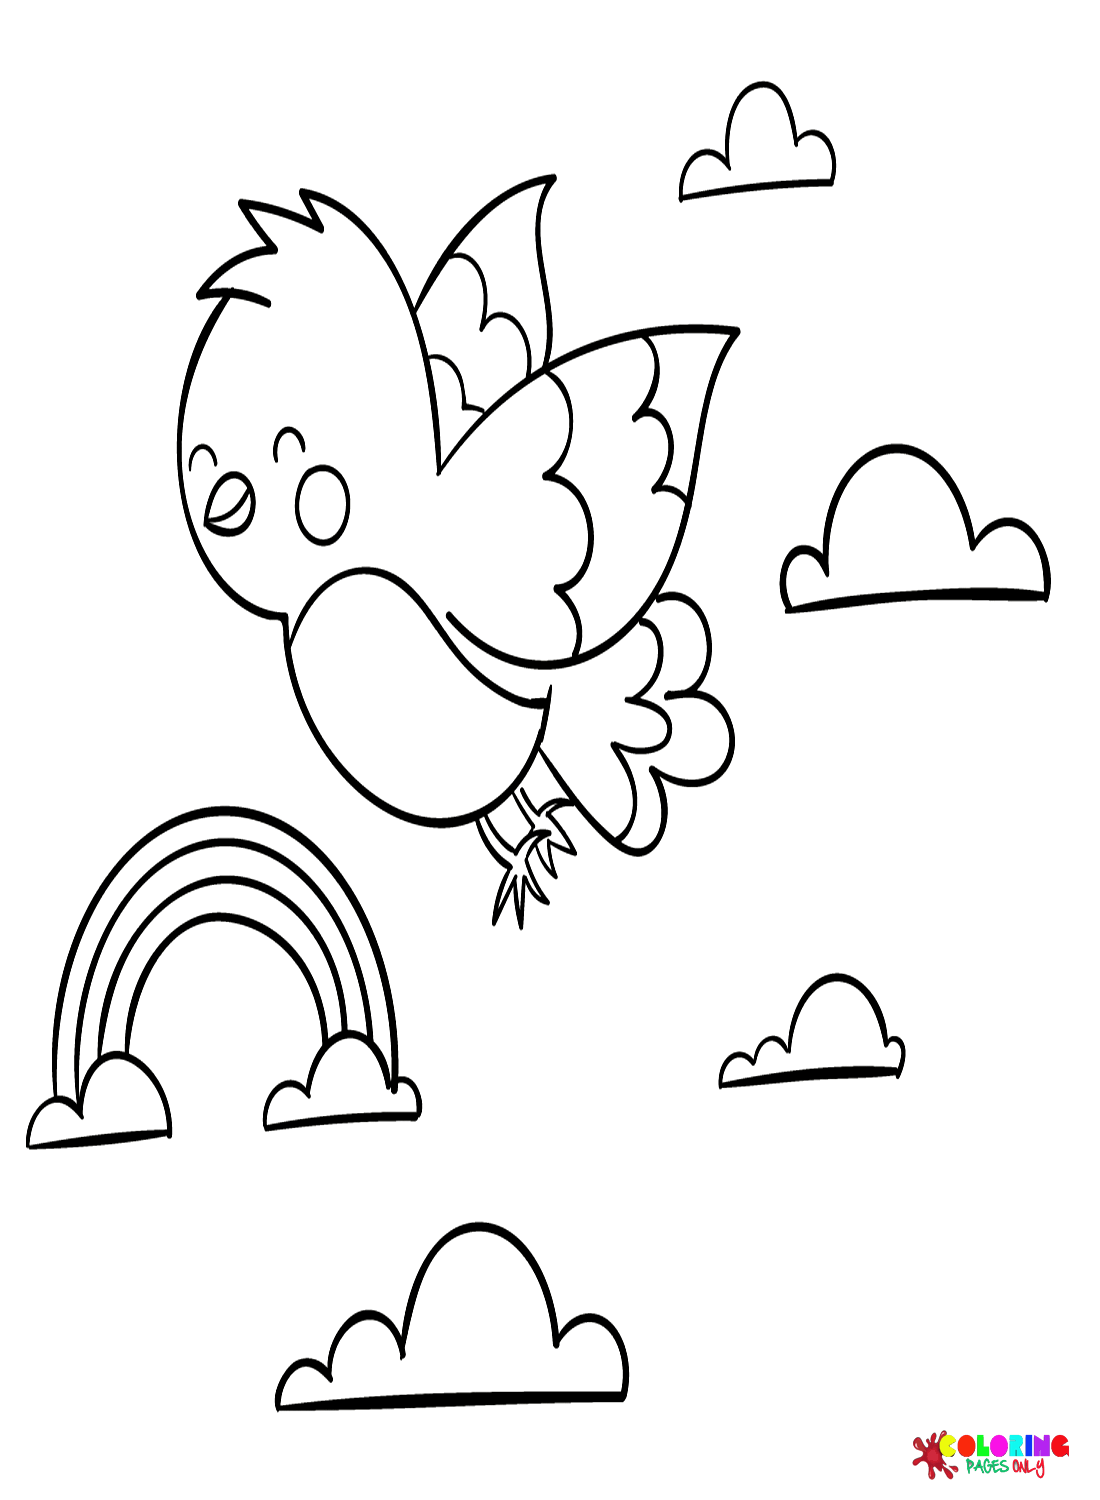 Cuckoo with Clouds Coloring Page